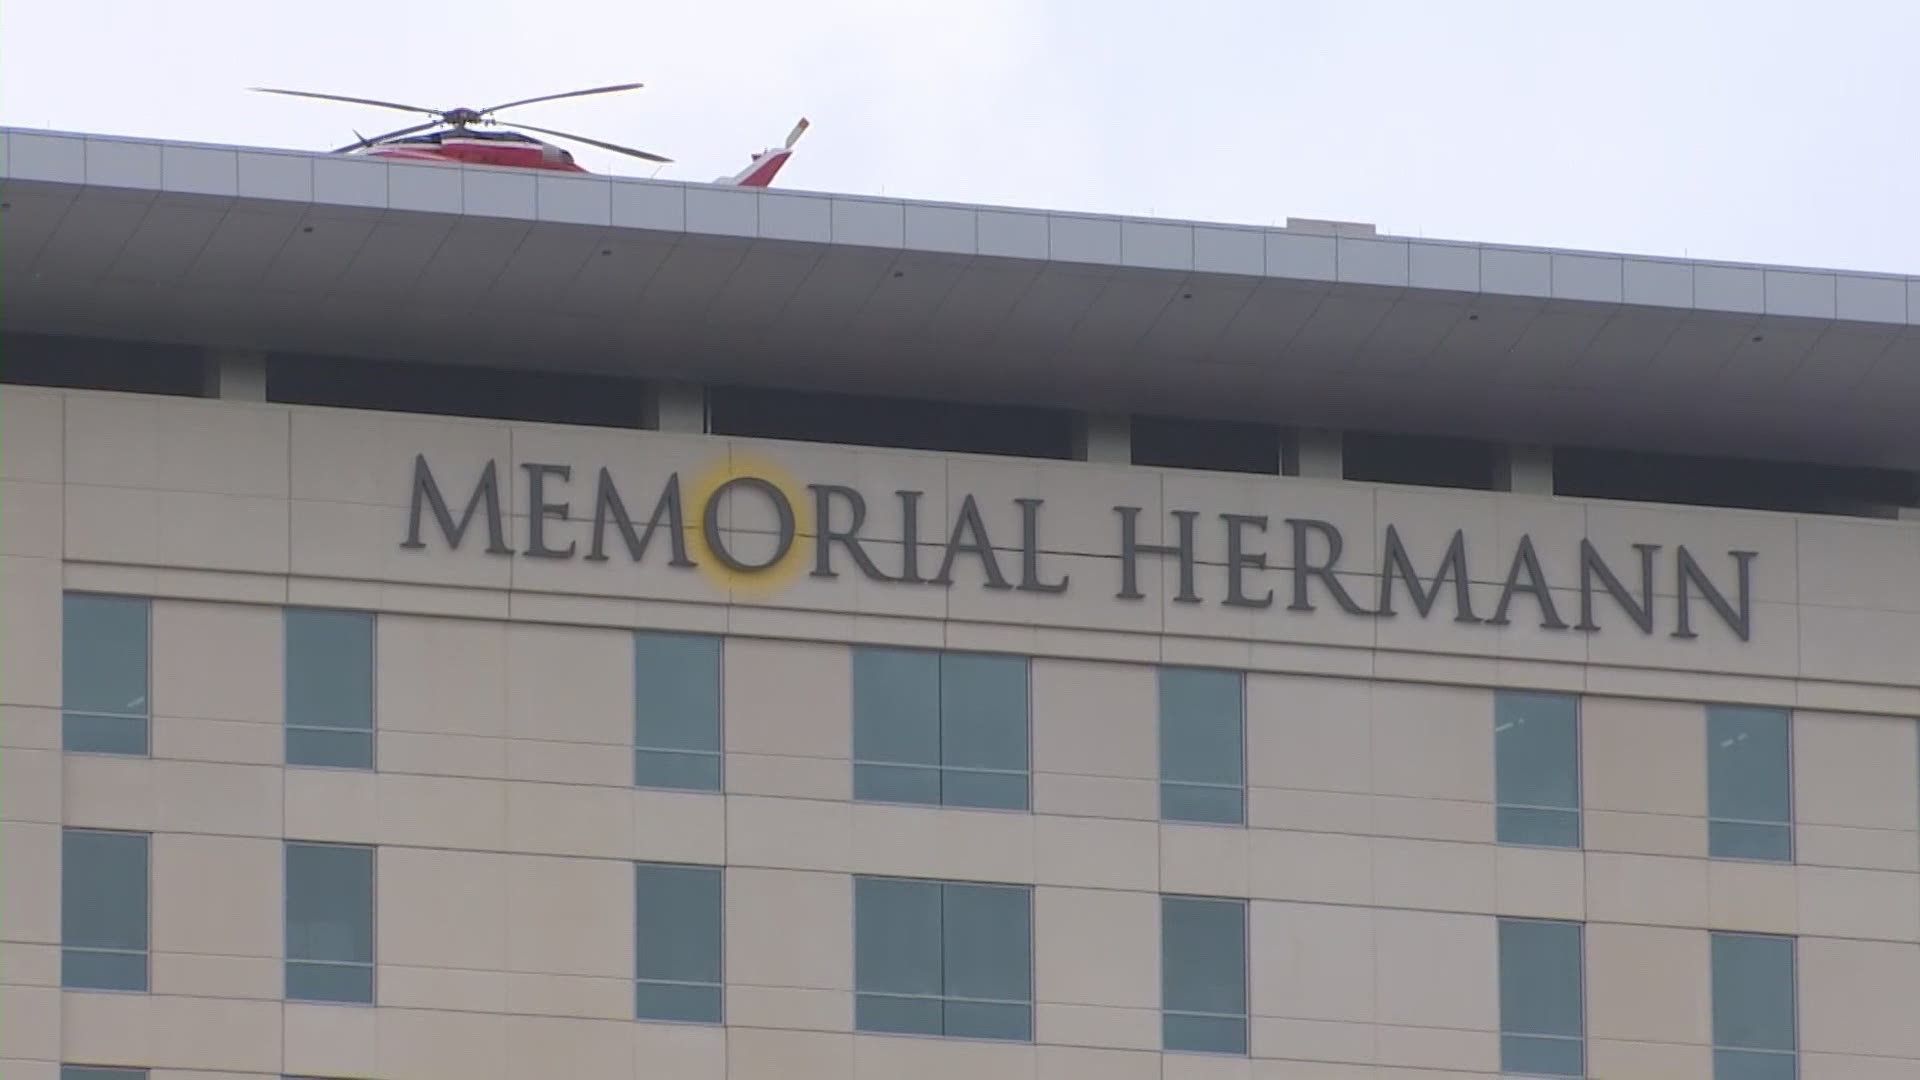 A contracted vendor with Memorial Hermann is looking into the security breach. Hackers could access social security numbers, financial information and more.